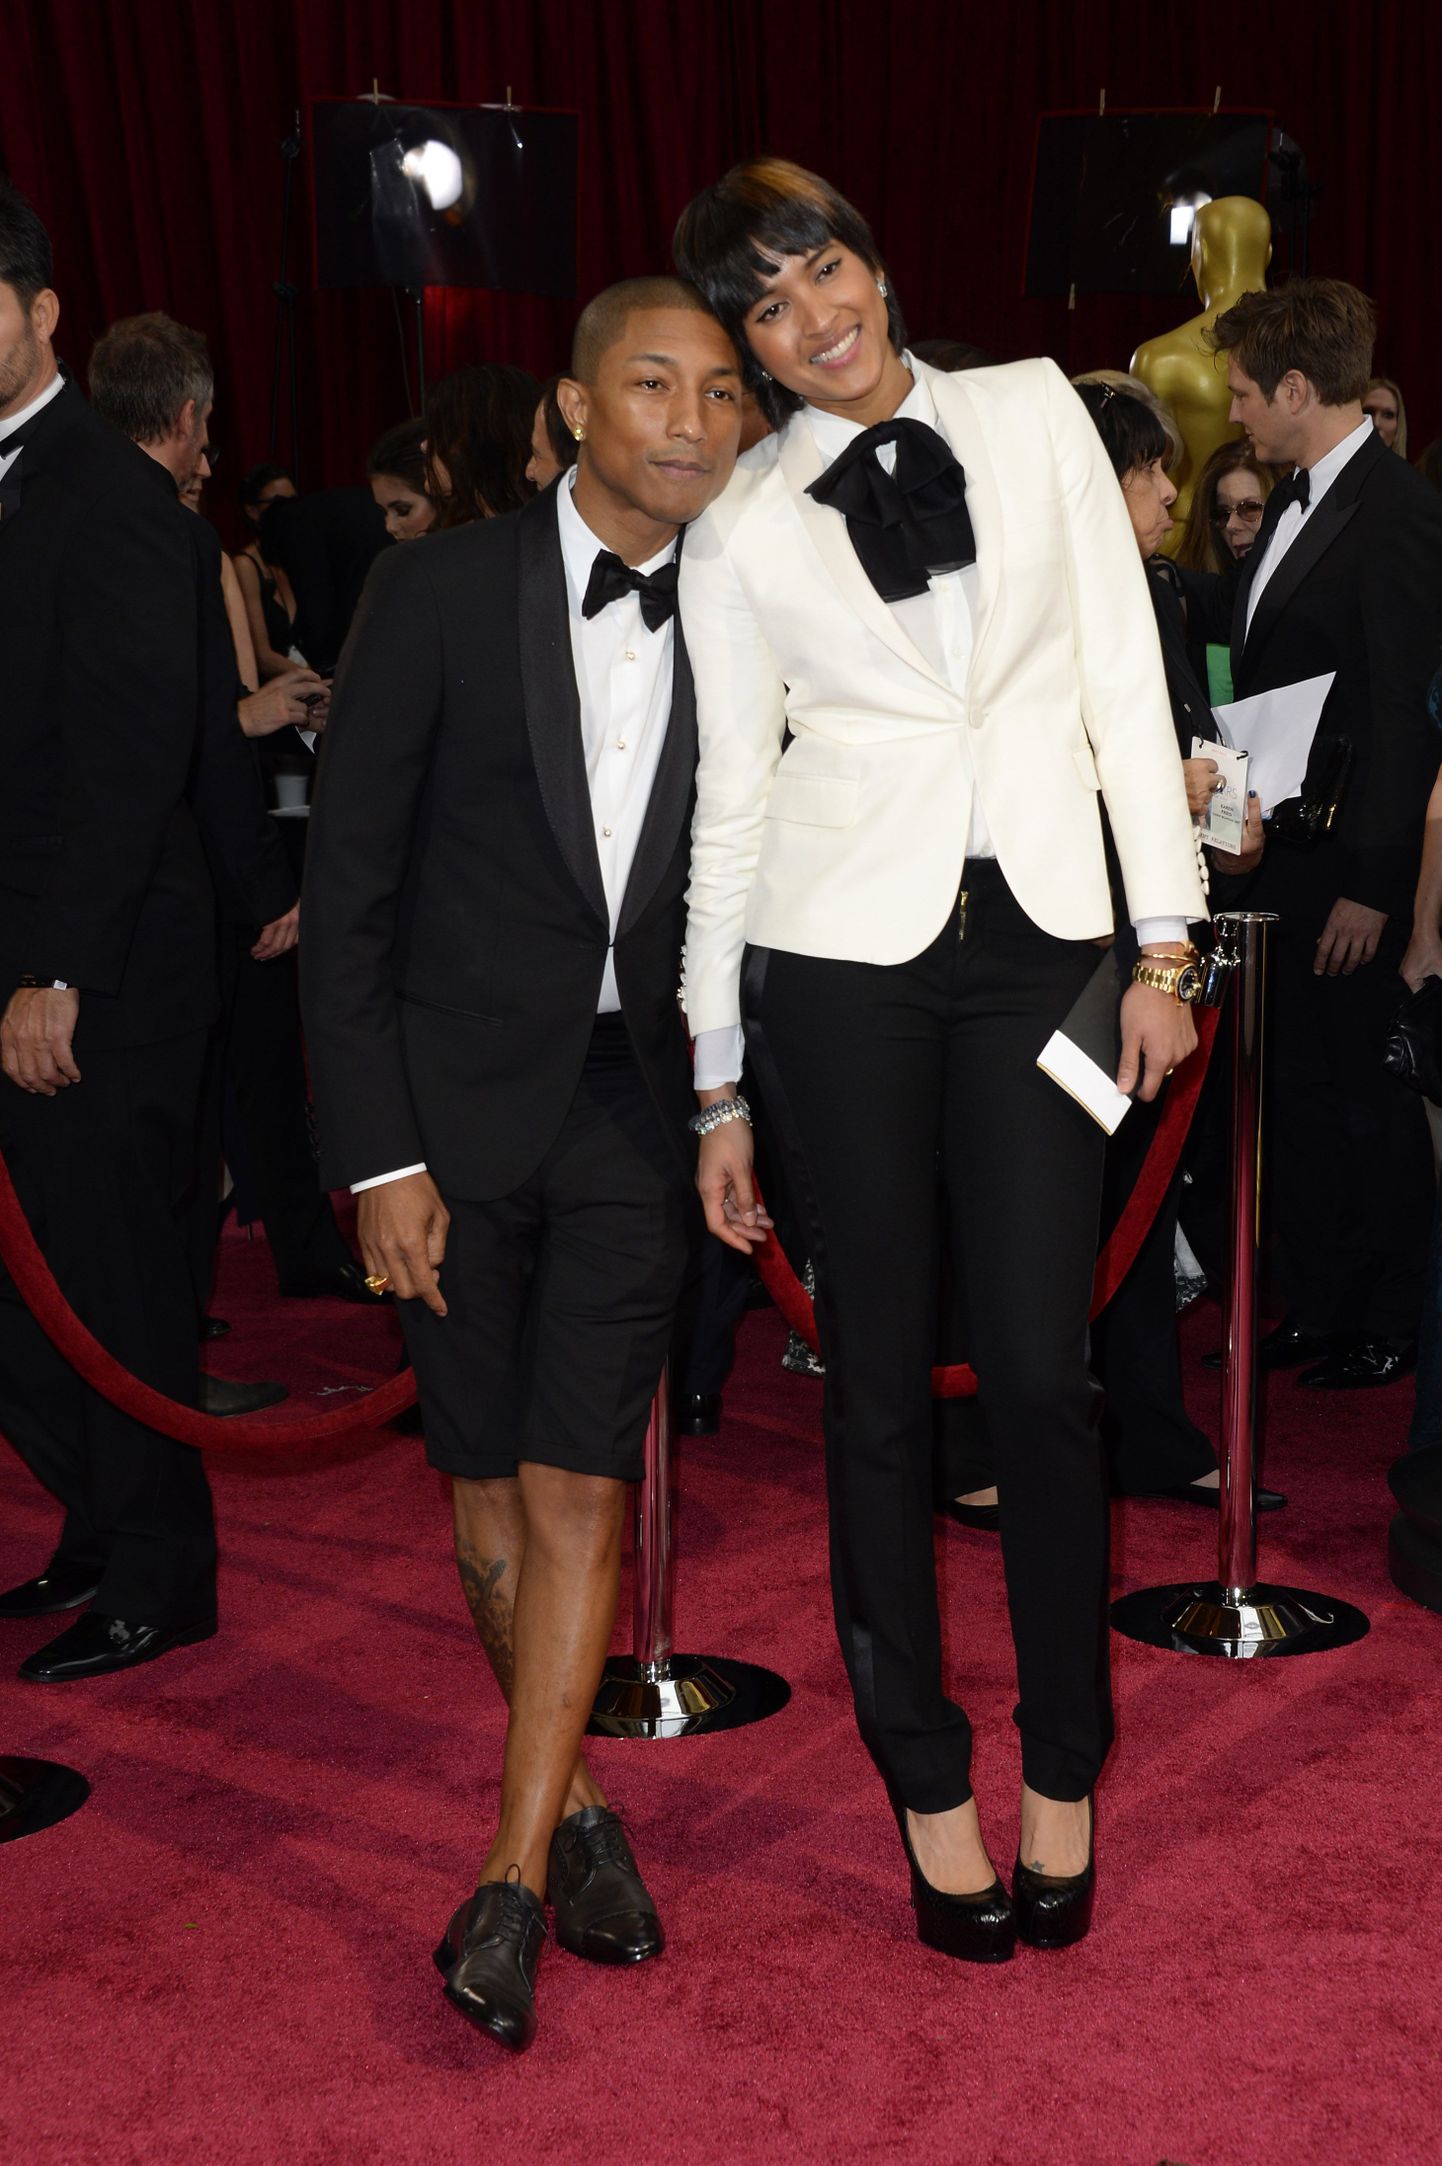 Pharrell Williams, left, and Helen Lasichanh arrive at the Oscars on Sunday, March 2, 2014, at the Dolby Theatre in Los Angeles.  (Photo by Dan Steinberg/Invision/AP) / TT / kod 436